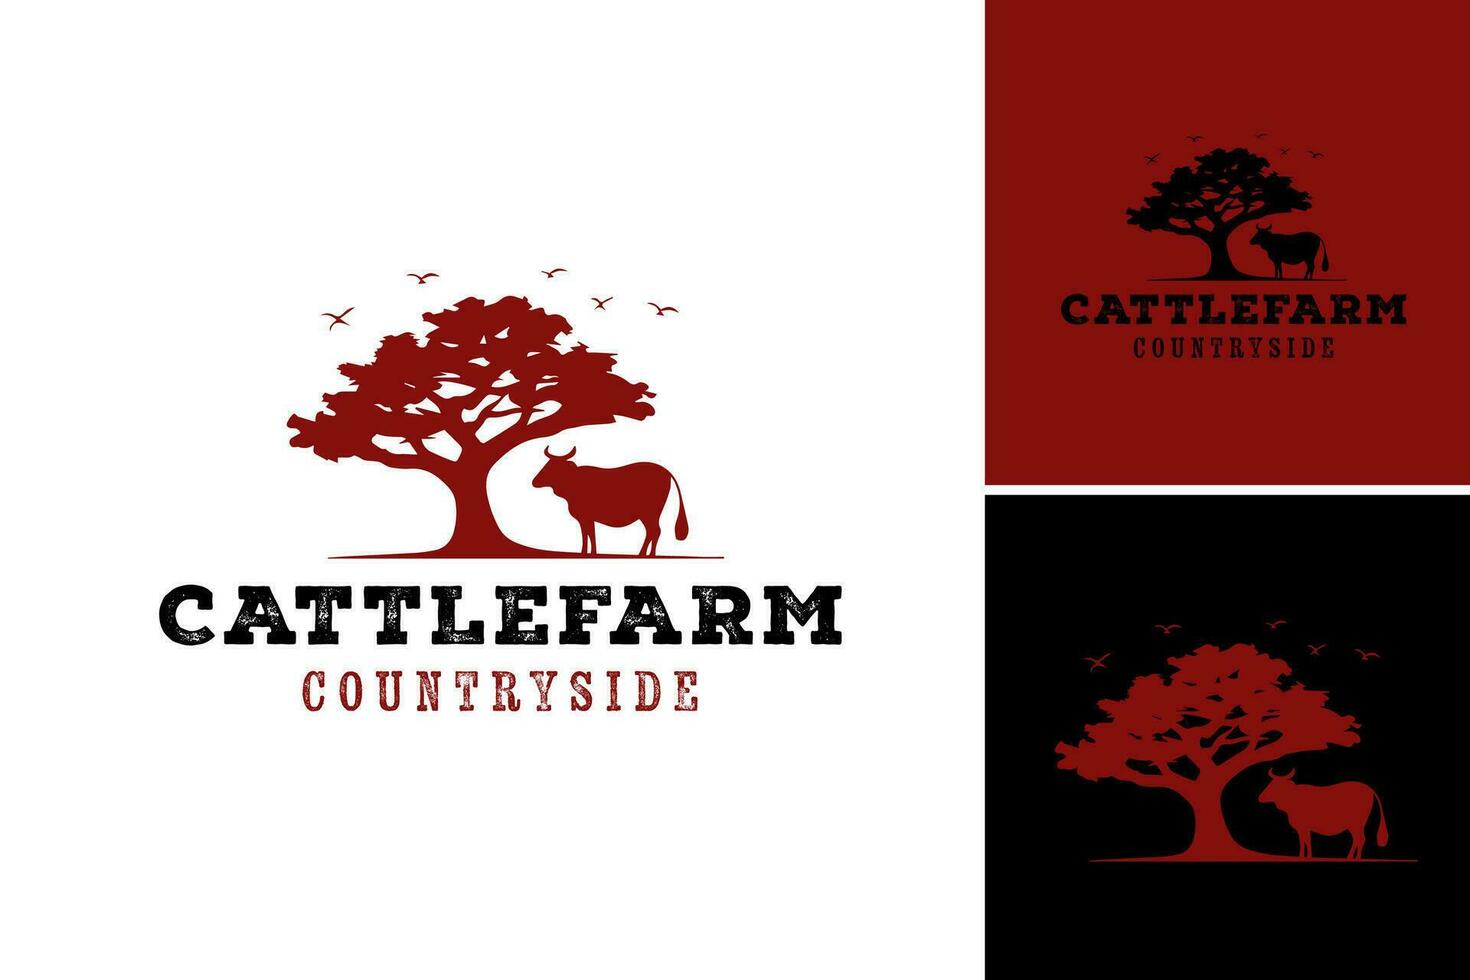 cattle farm country side logo is suitable for logos and branding related to cattle farms in rural areas. vector